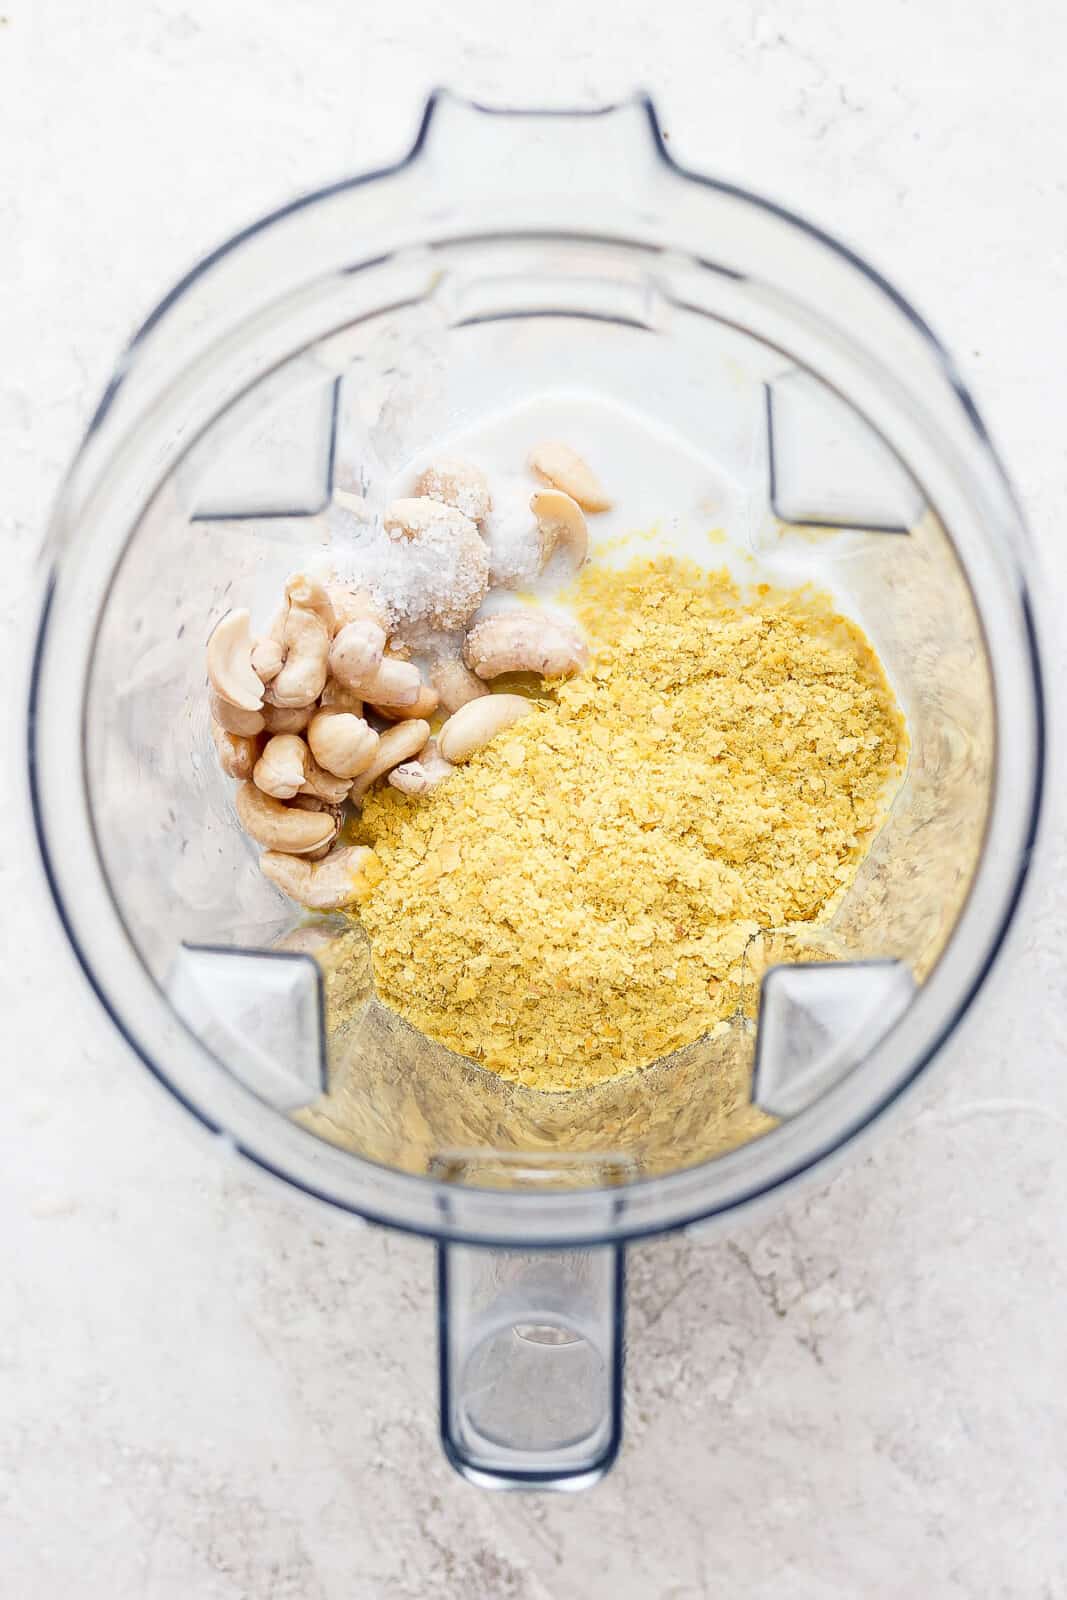 Ingredients for cashew cream added to a blender.